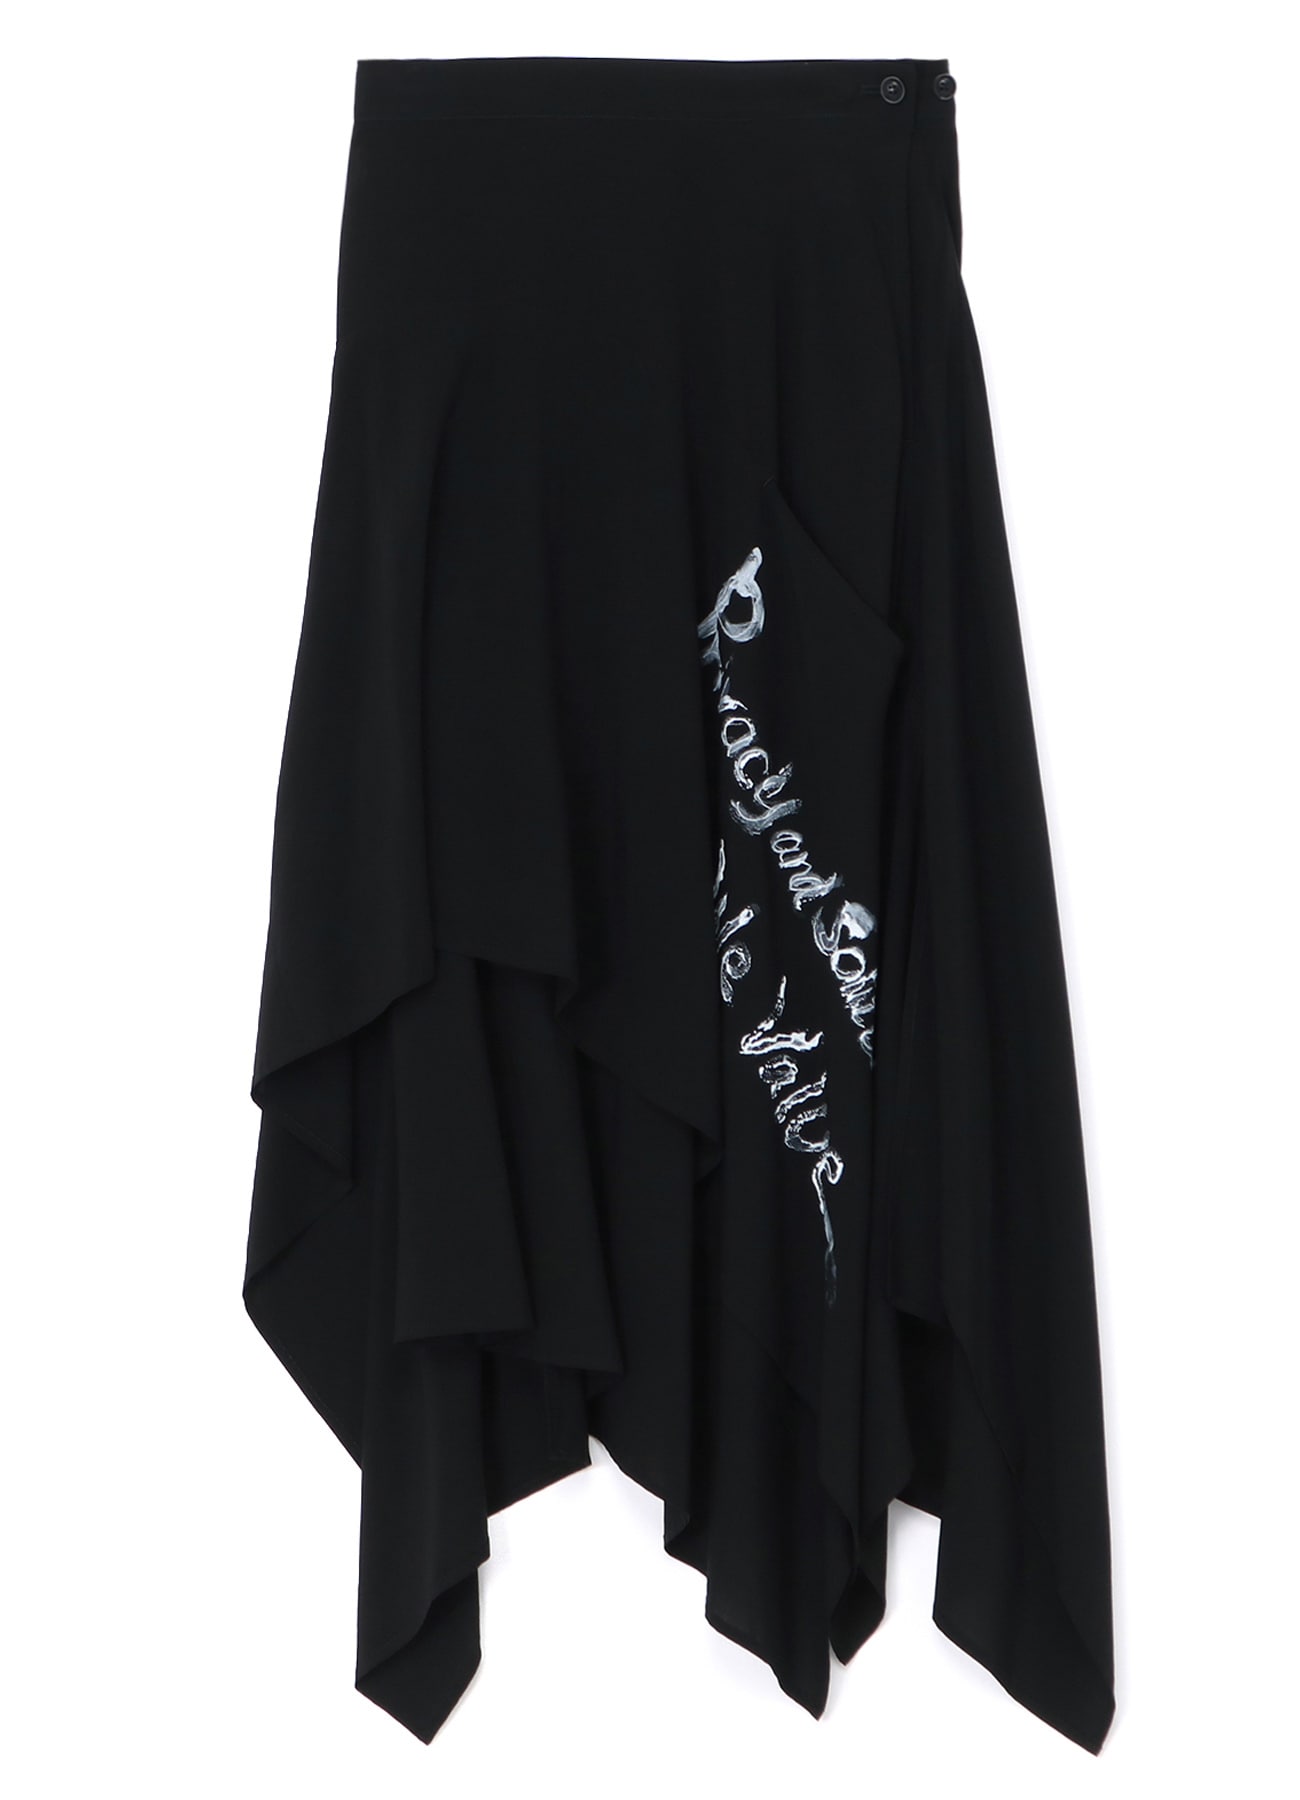 "PRIVACY AND SOLITUDE WE VALUE" SKIRT